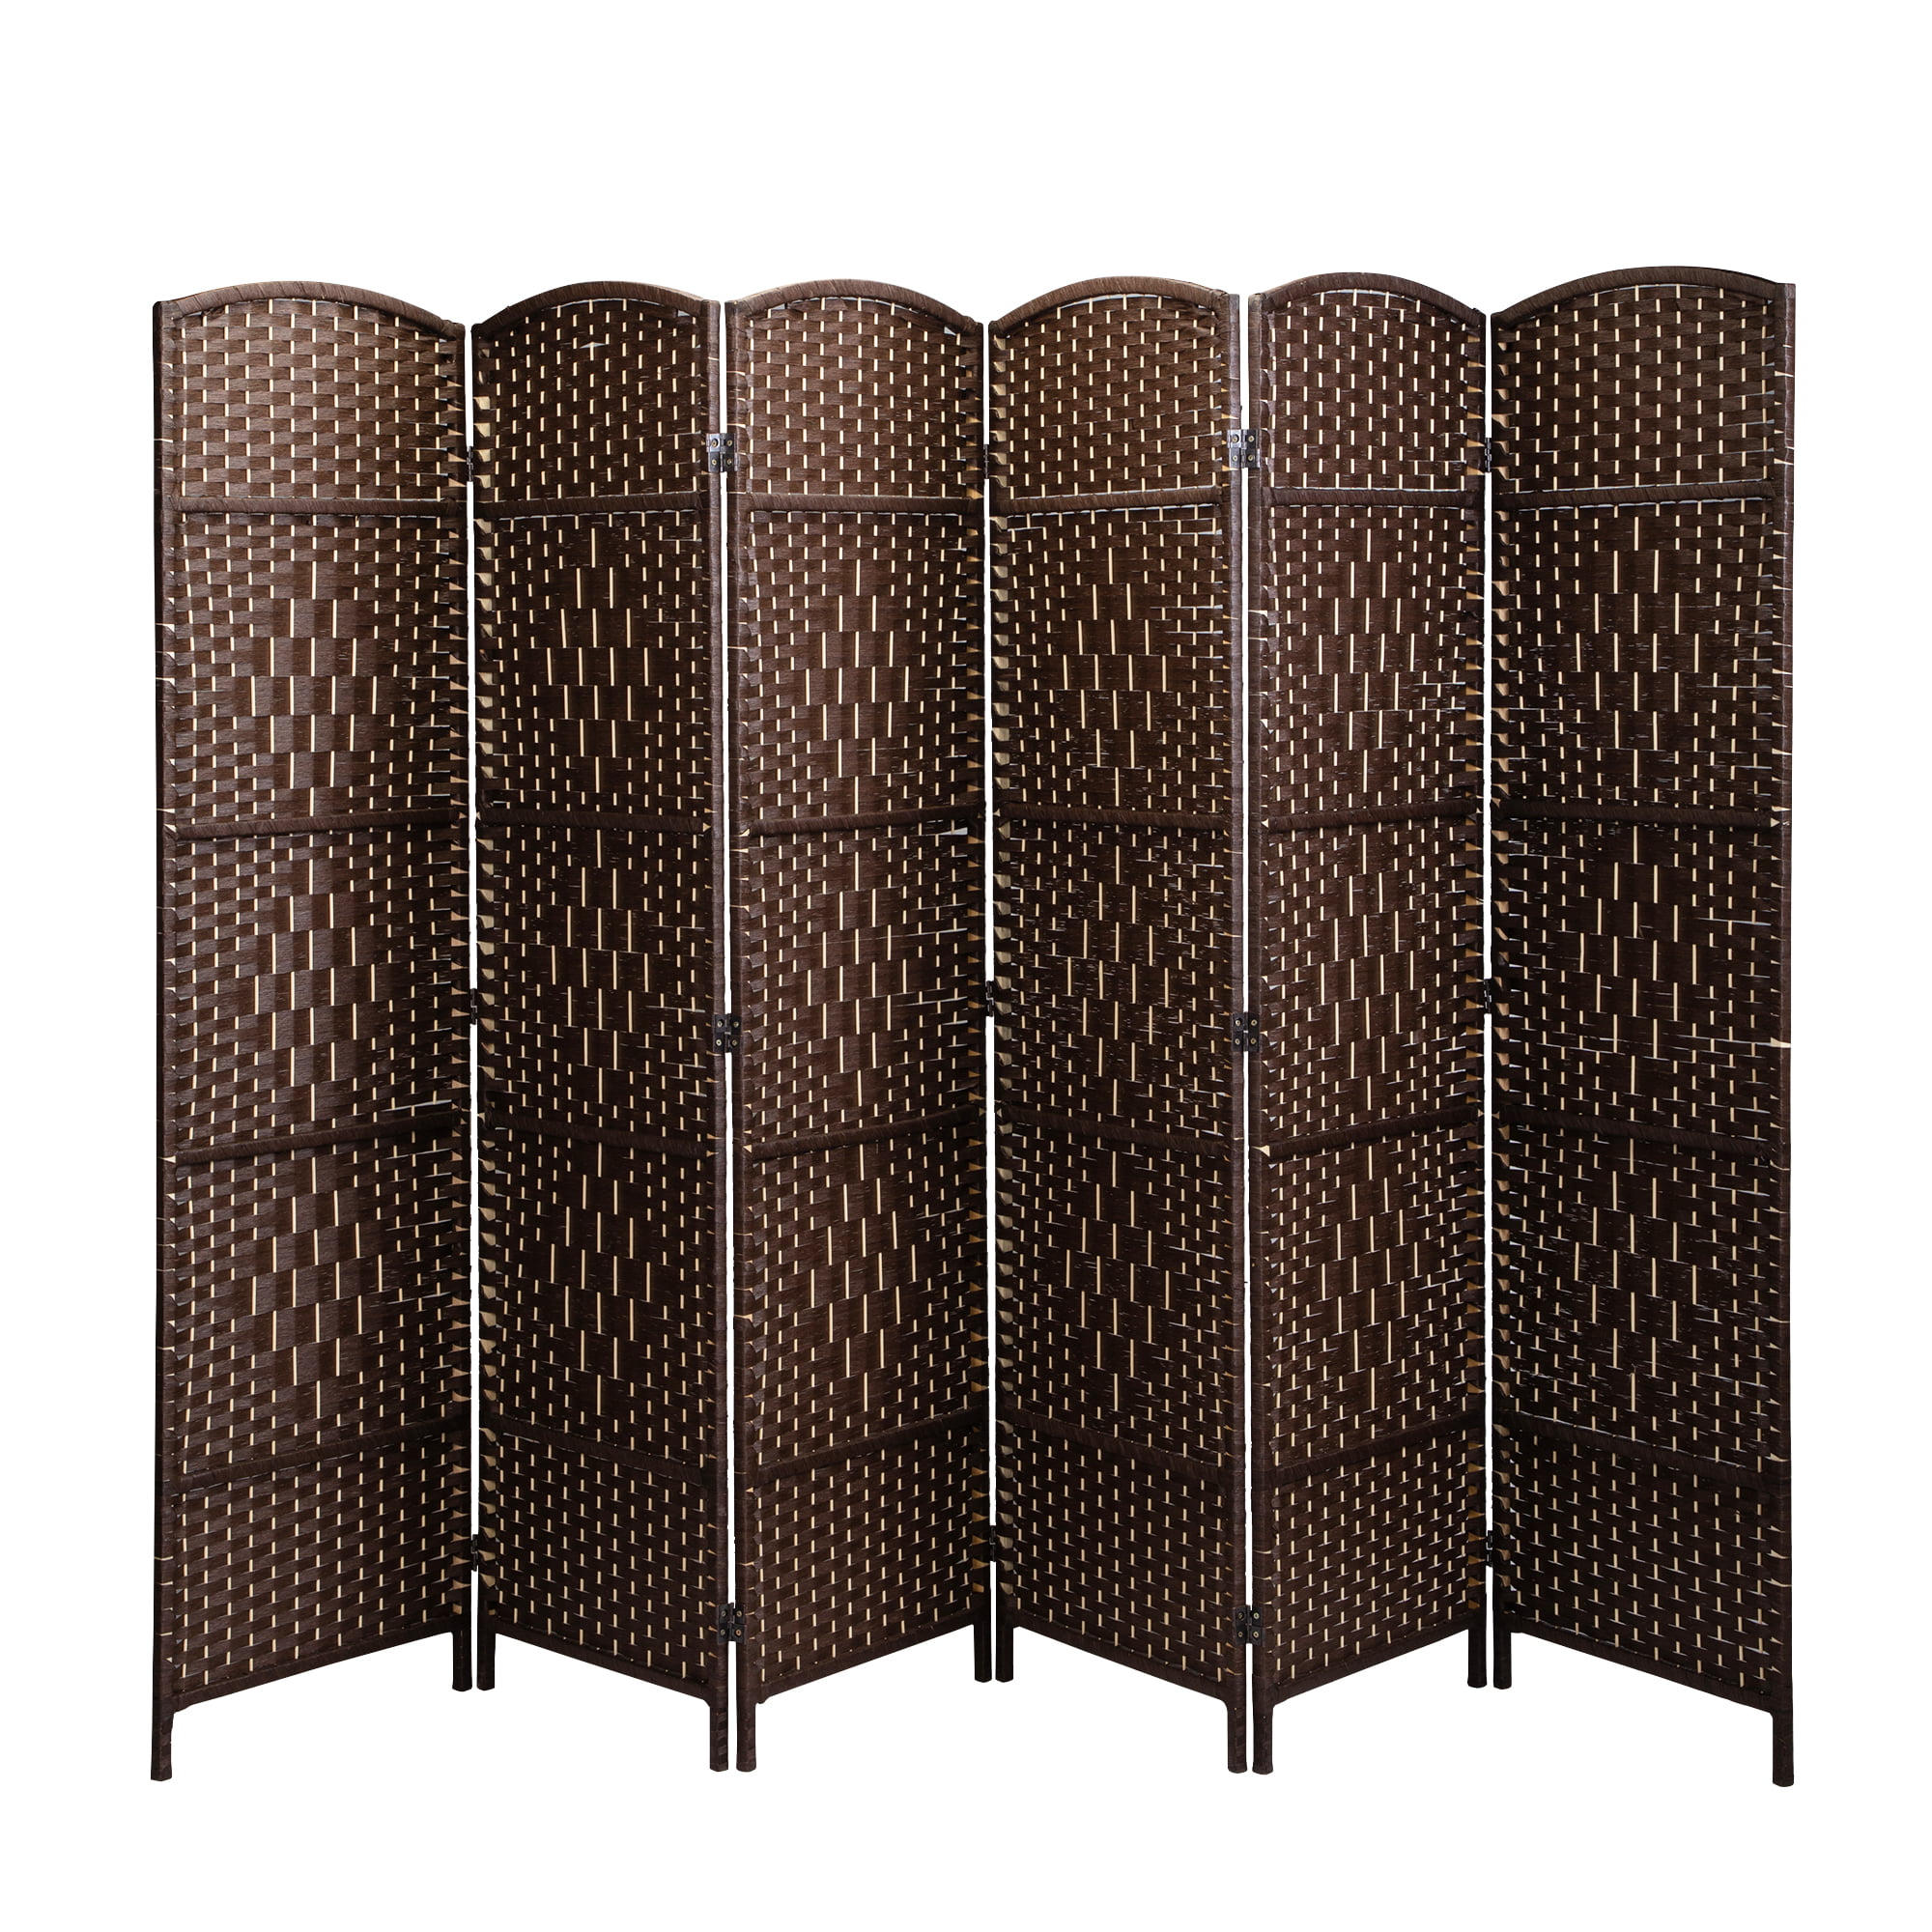 6 Panels Room Divider Folding Privacy Screen Diamond Weave Fiber Double Hinged 